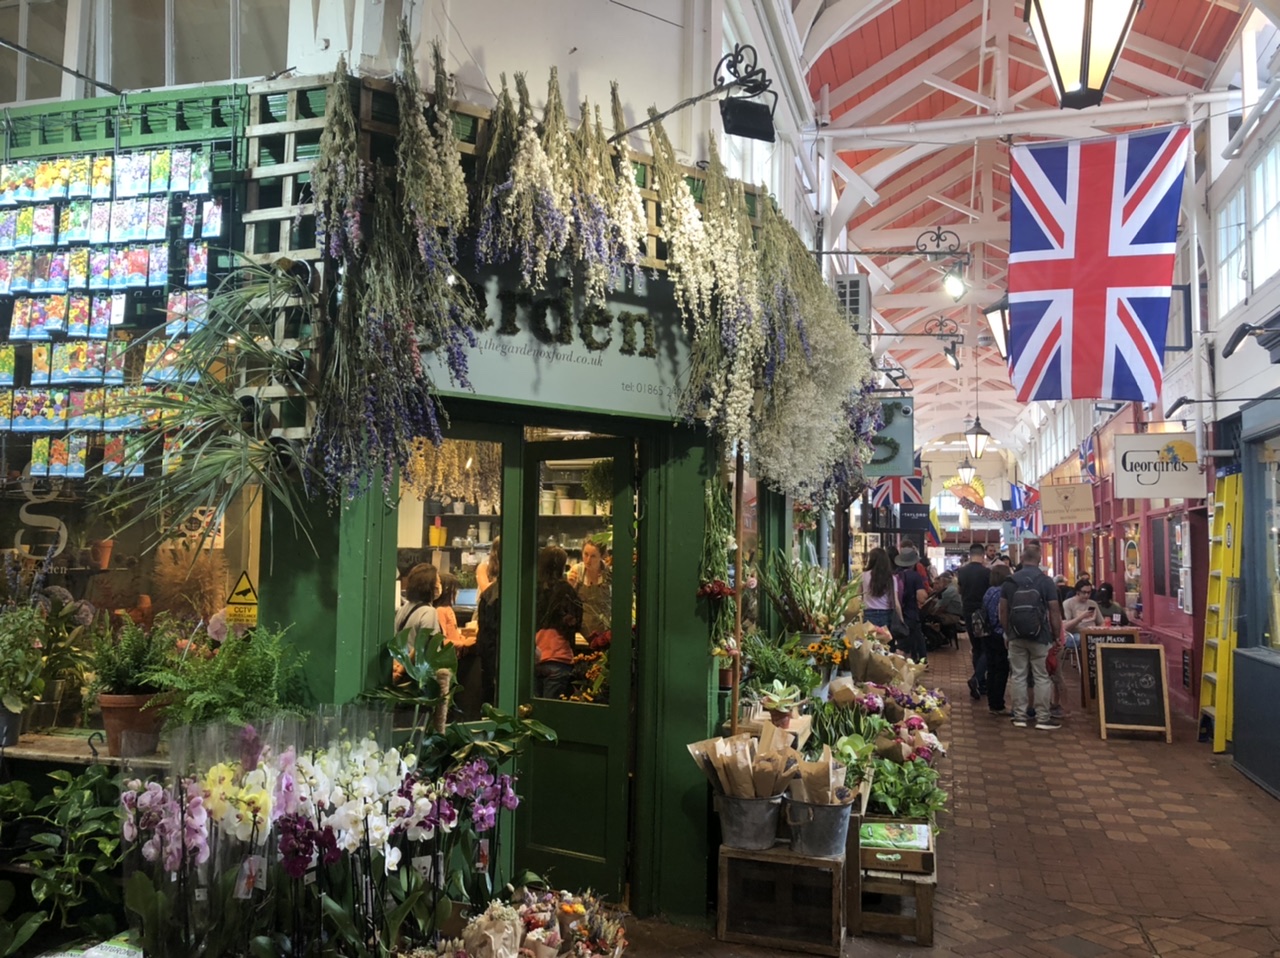 Garden centre on corner in Oxford Covered Market looking down row with shops and British flag hanging from ceiling